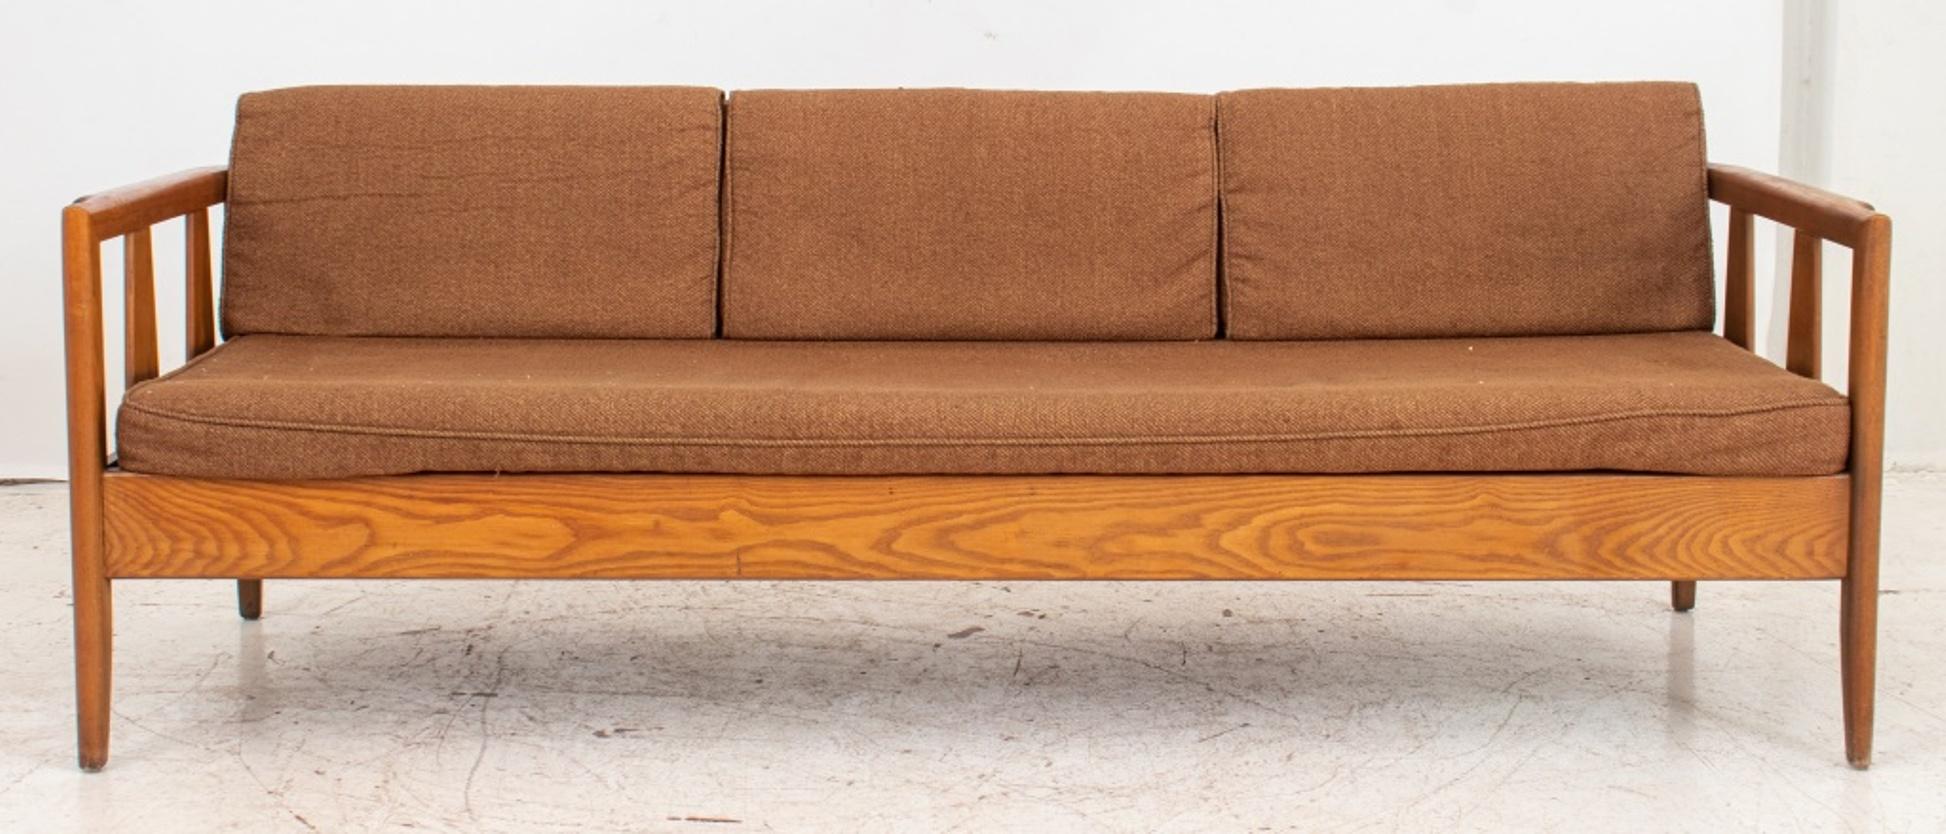 Danish Modern oak sofa in the manner of Hans Wegner (Danish, 1914-2007) of rectangular form, roll arms, and drop in cushions covered in brown boucle. Measures: 28